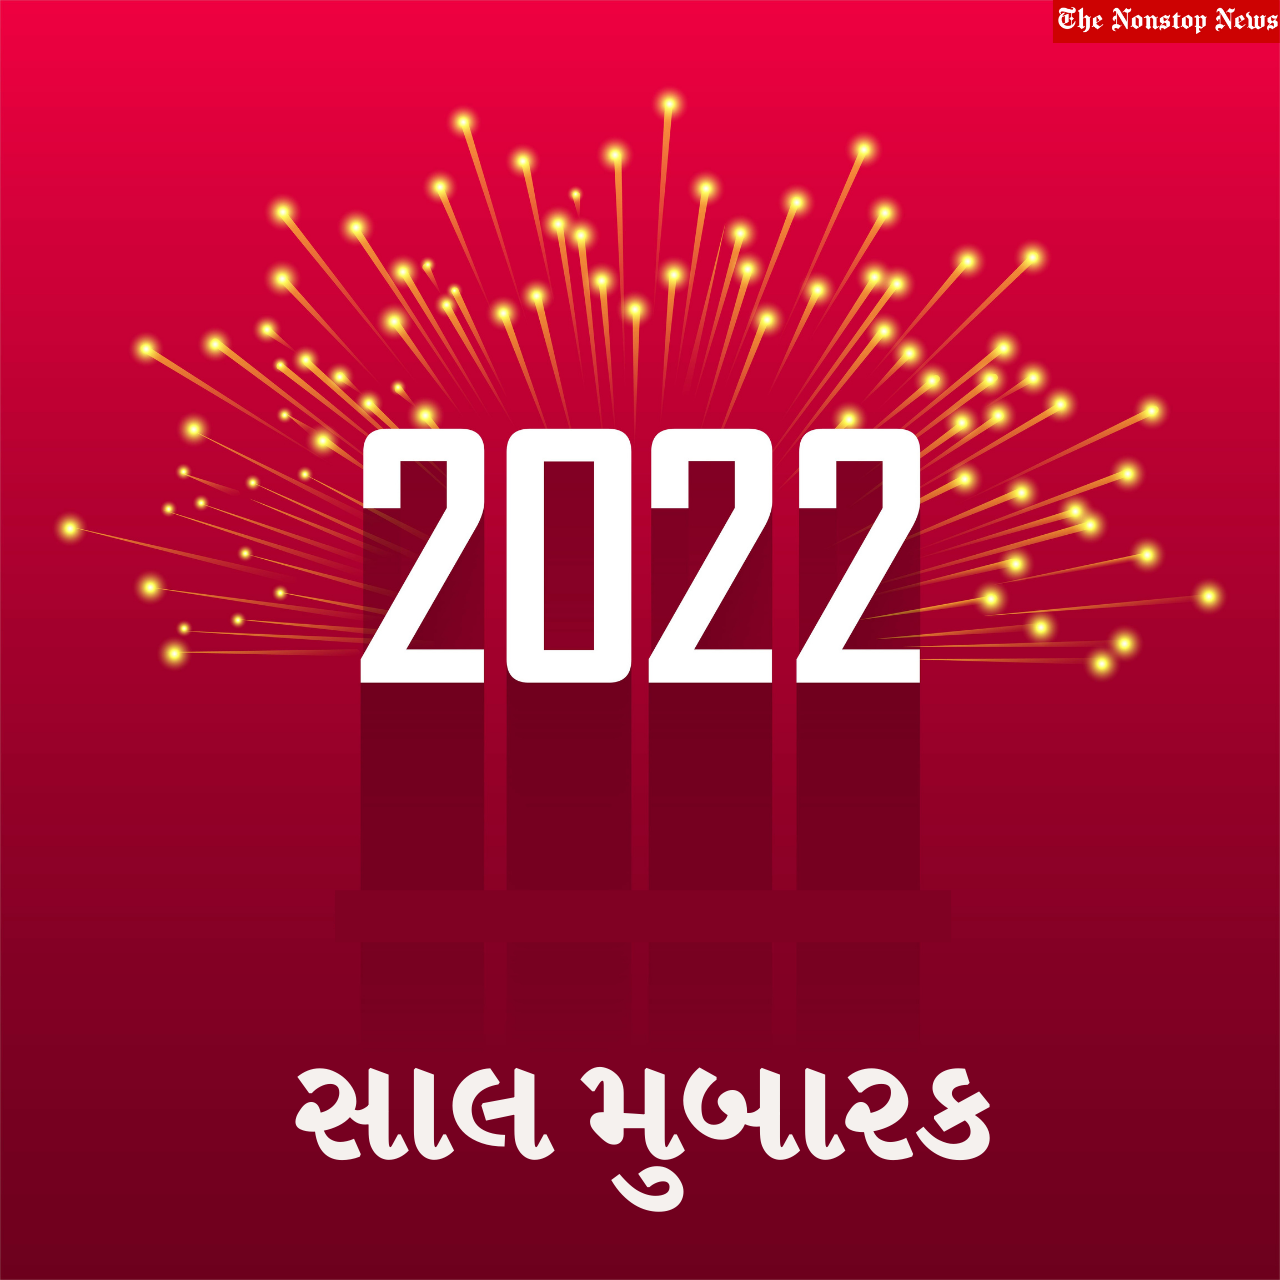 Happy New Year 2022: Gujarati Quotes, Wishes, Greetings, HD Images, Messages, Posters, and Phrases to share